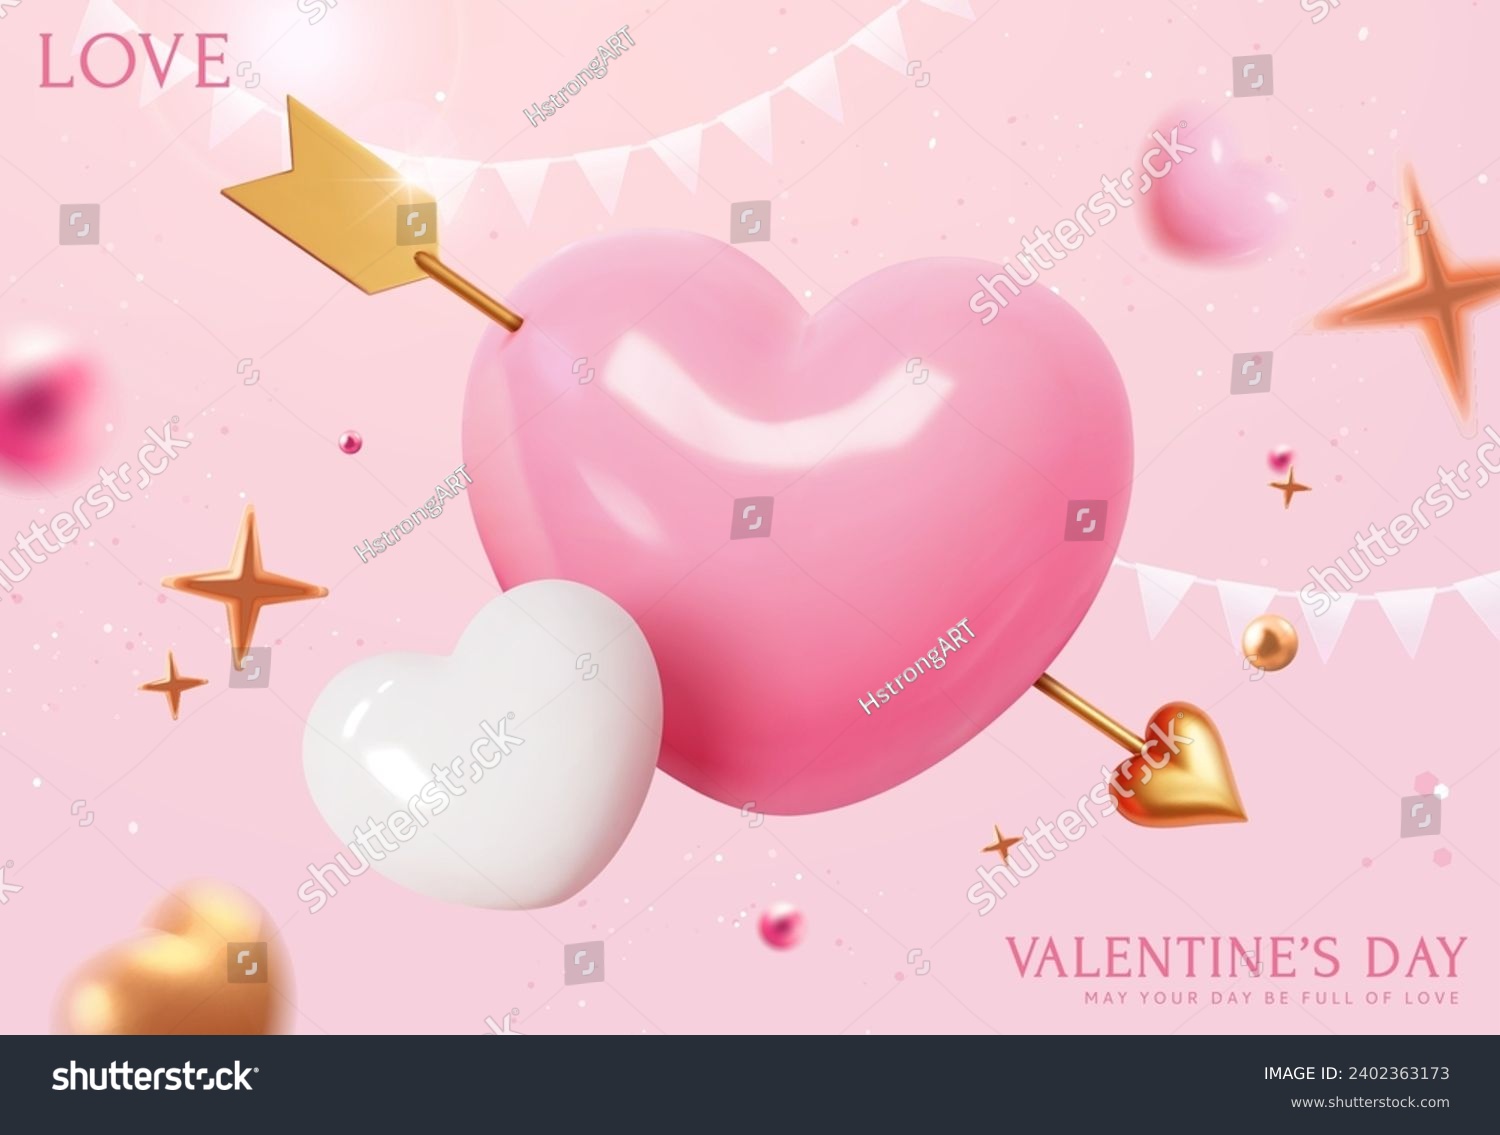 SVG of 3D pink heart with golden arrow on light pink background with hearts and festive decors. svg